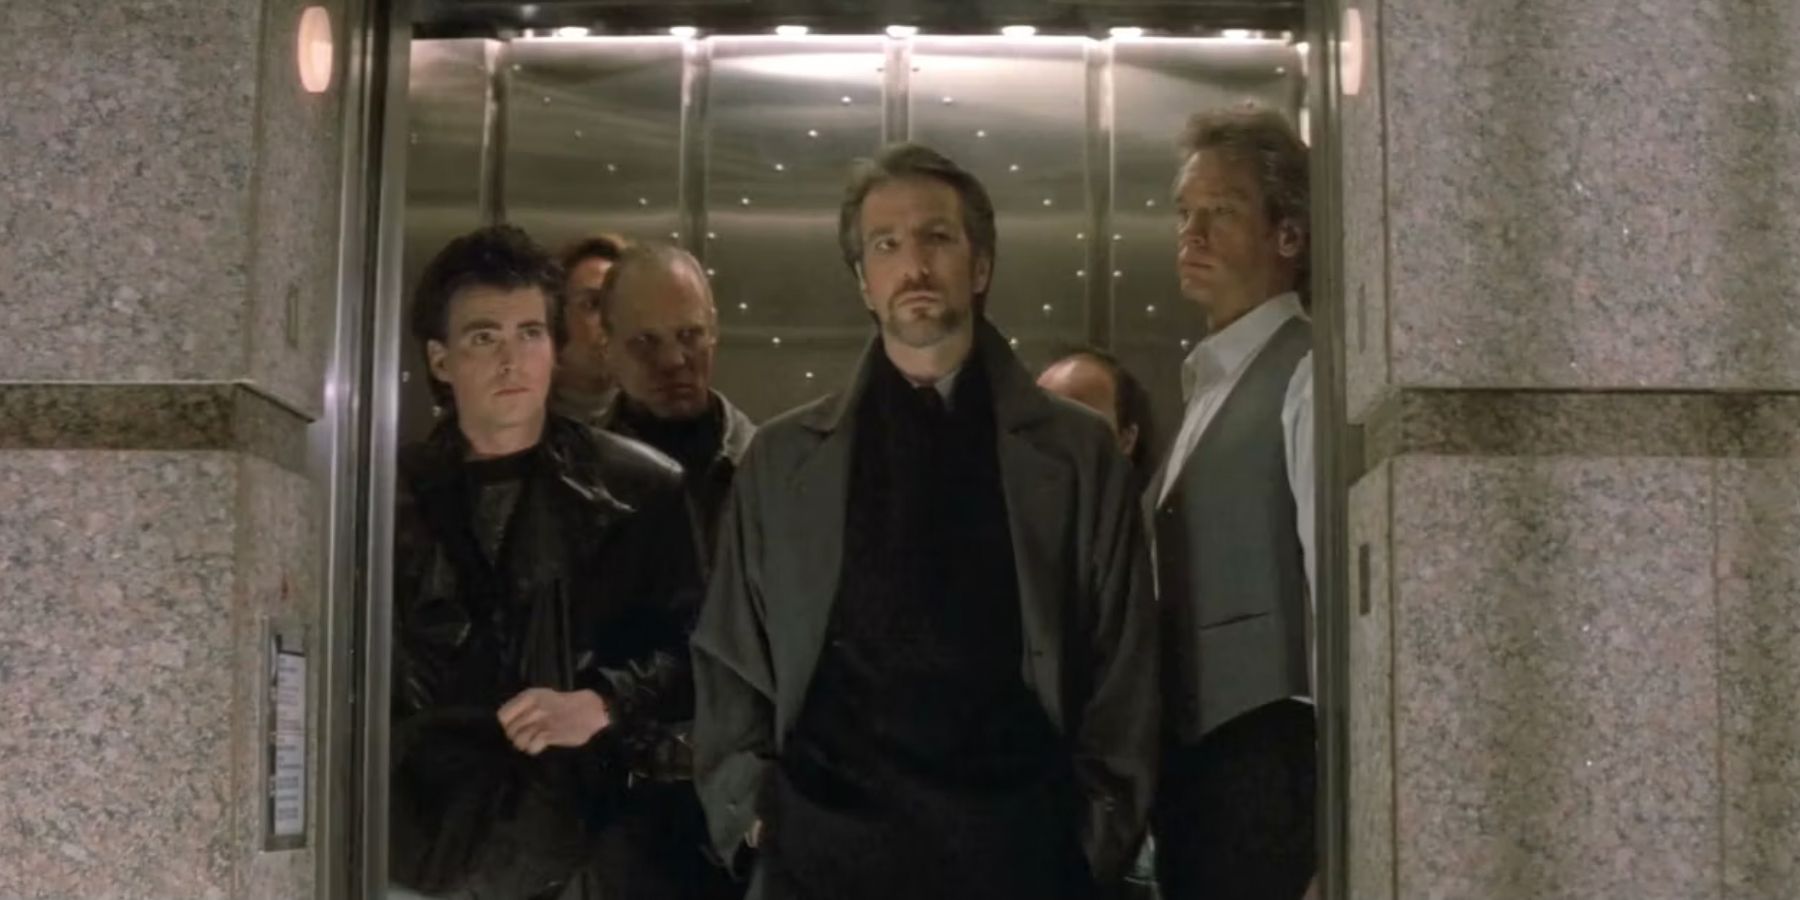 Hans Gruber at the front of an elevator full of his criminal team in Die Hard